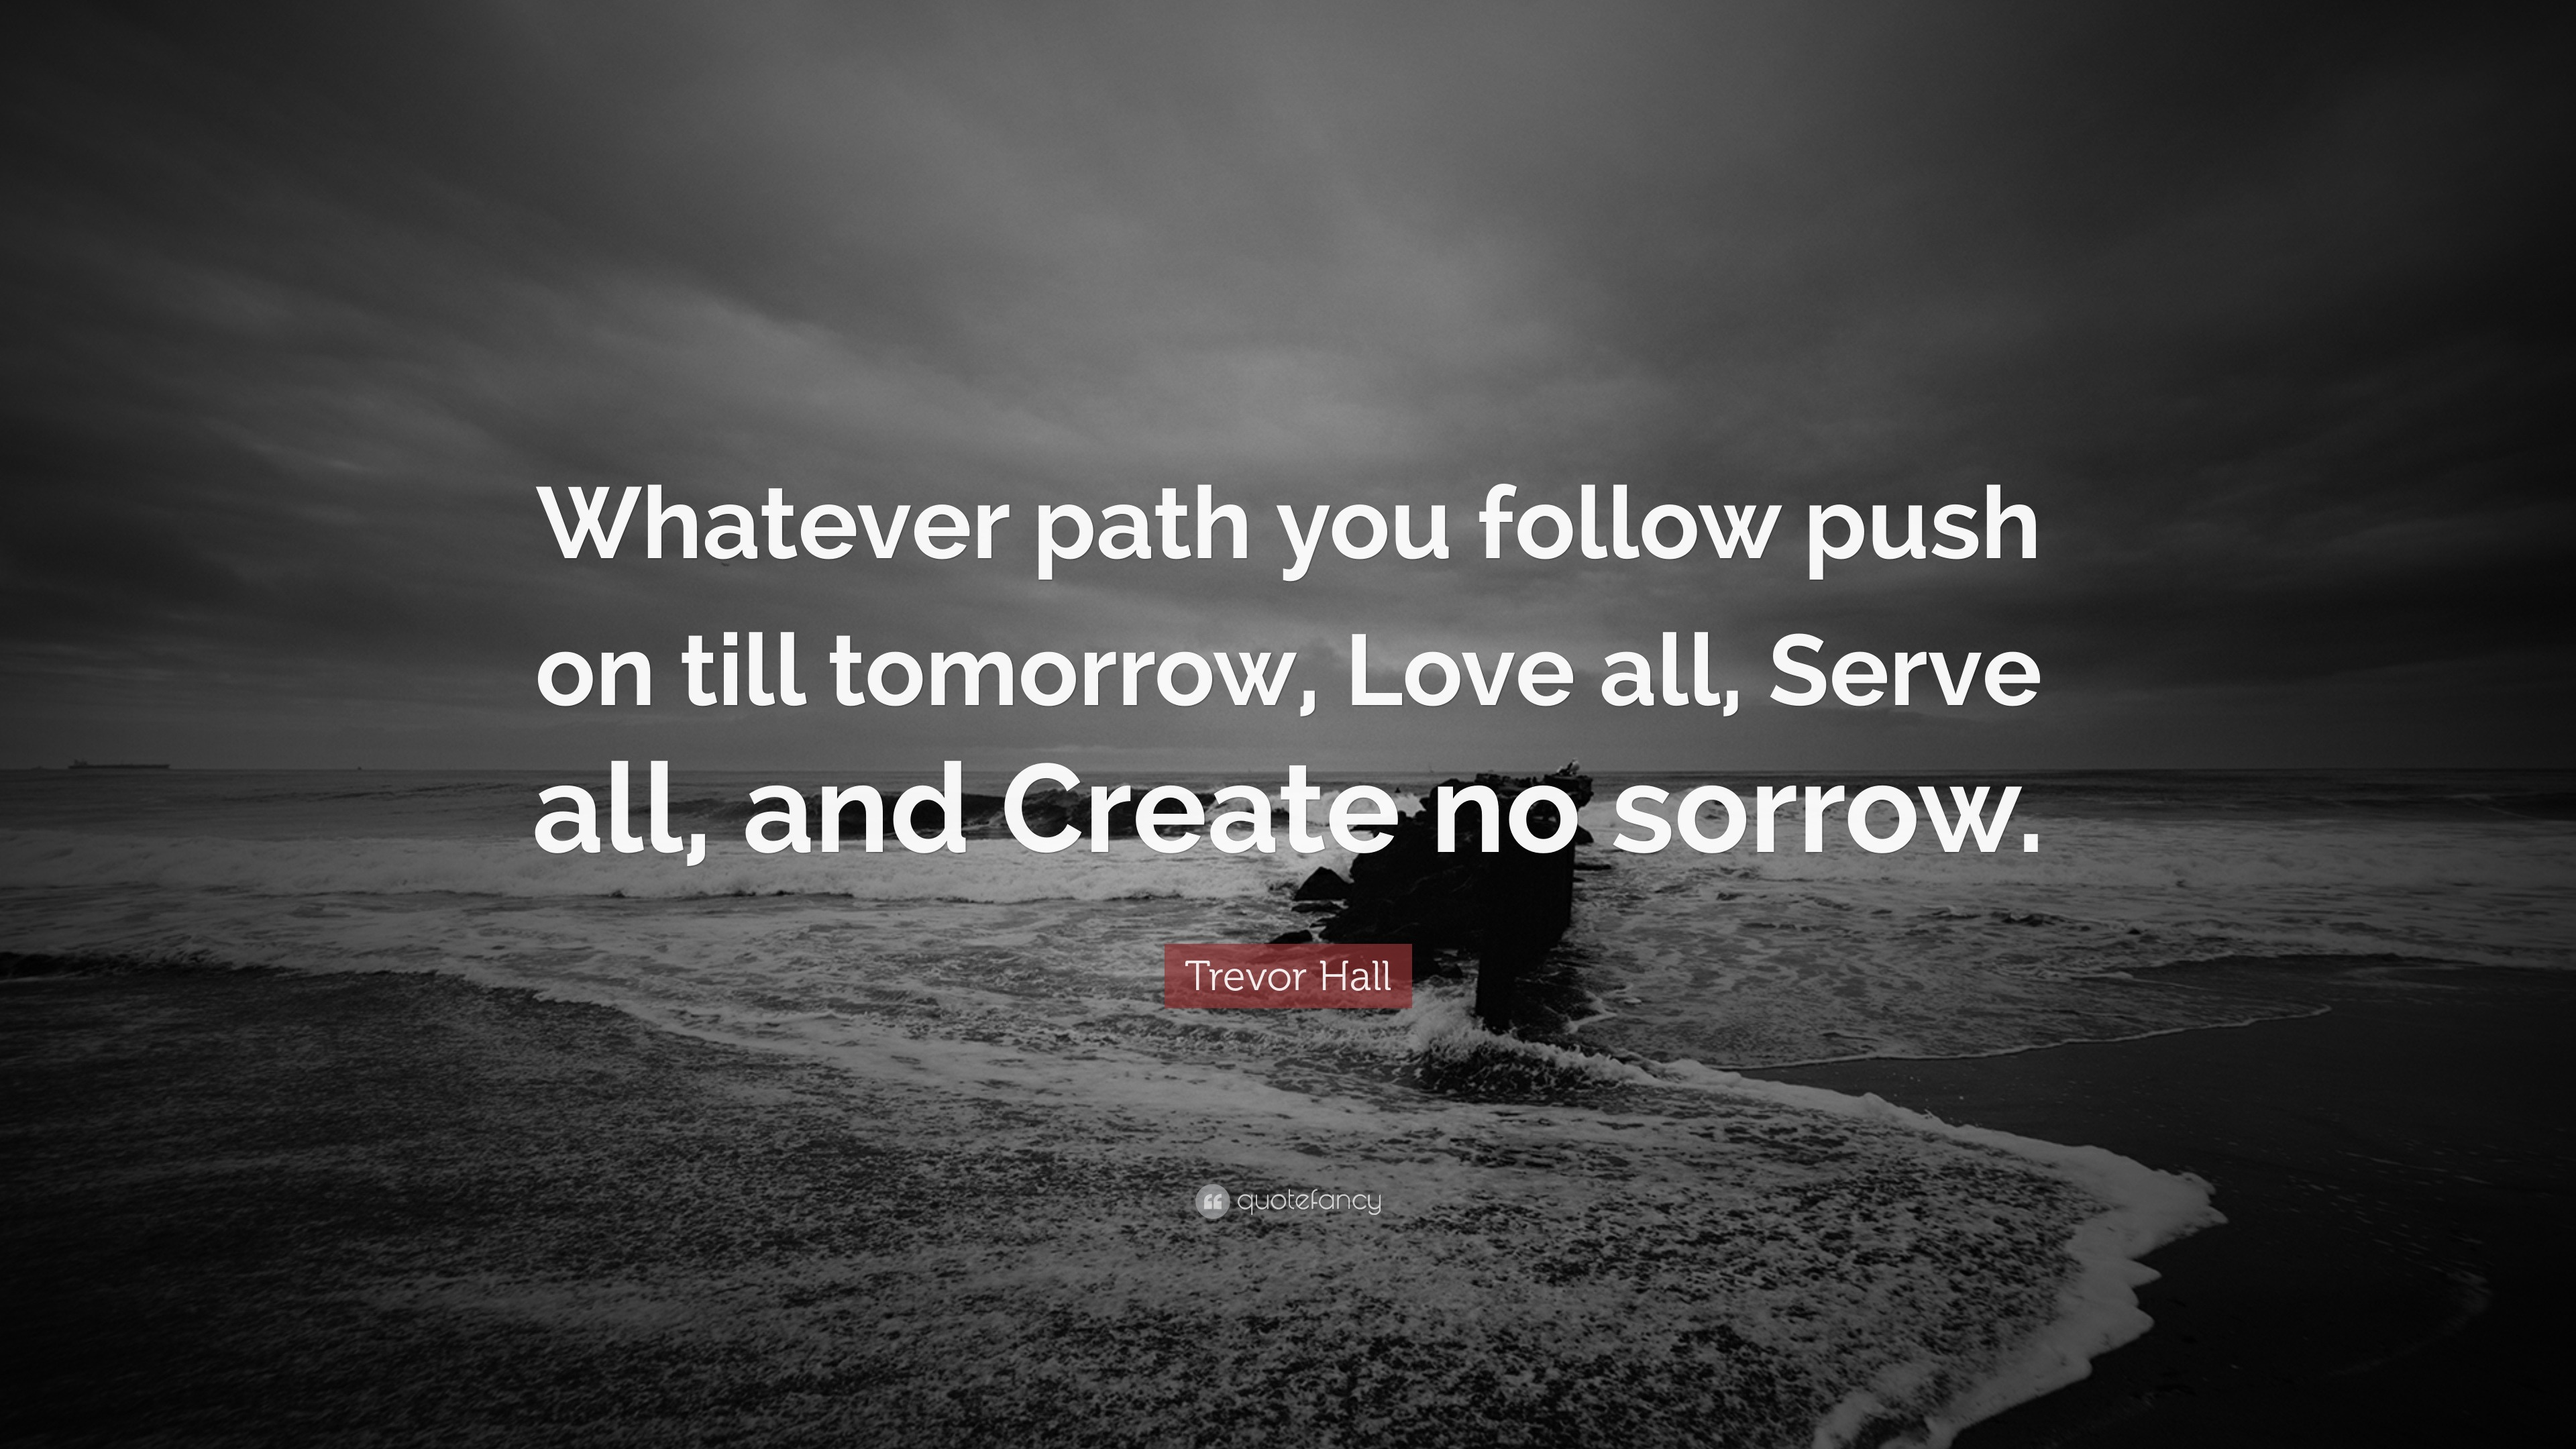 Trevor Hall Quote: “Whatever path you follow push on till tomorrow ...